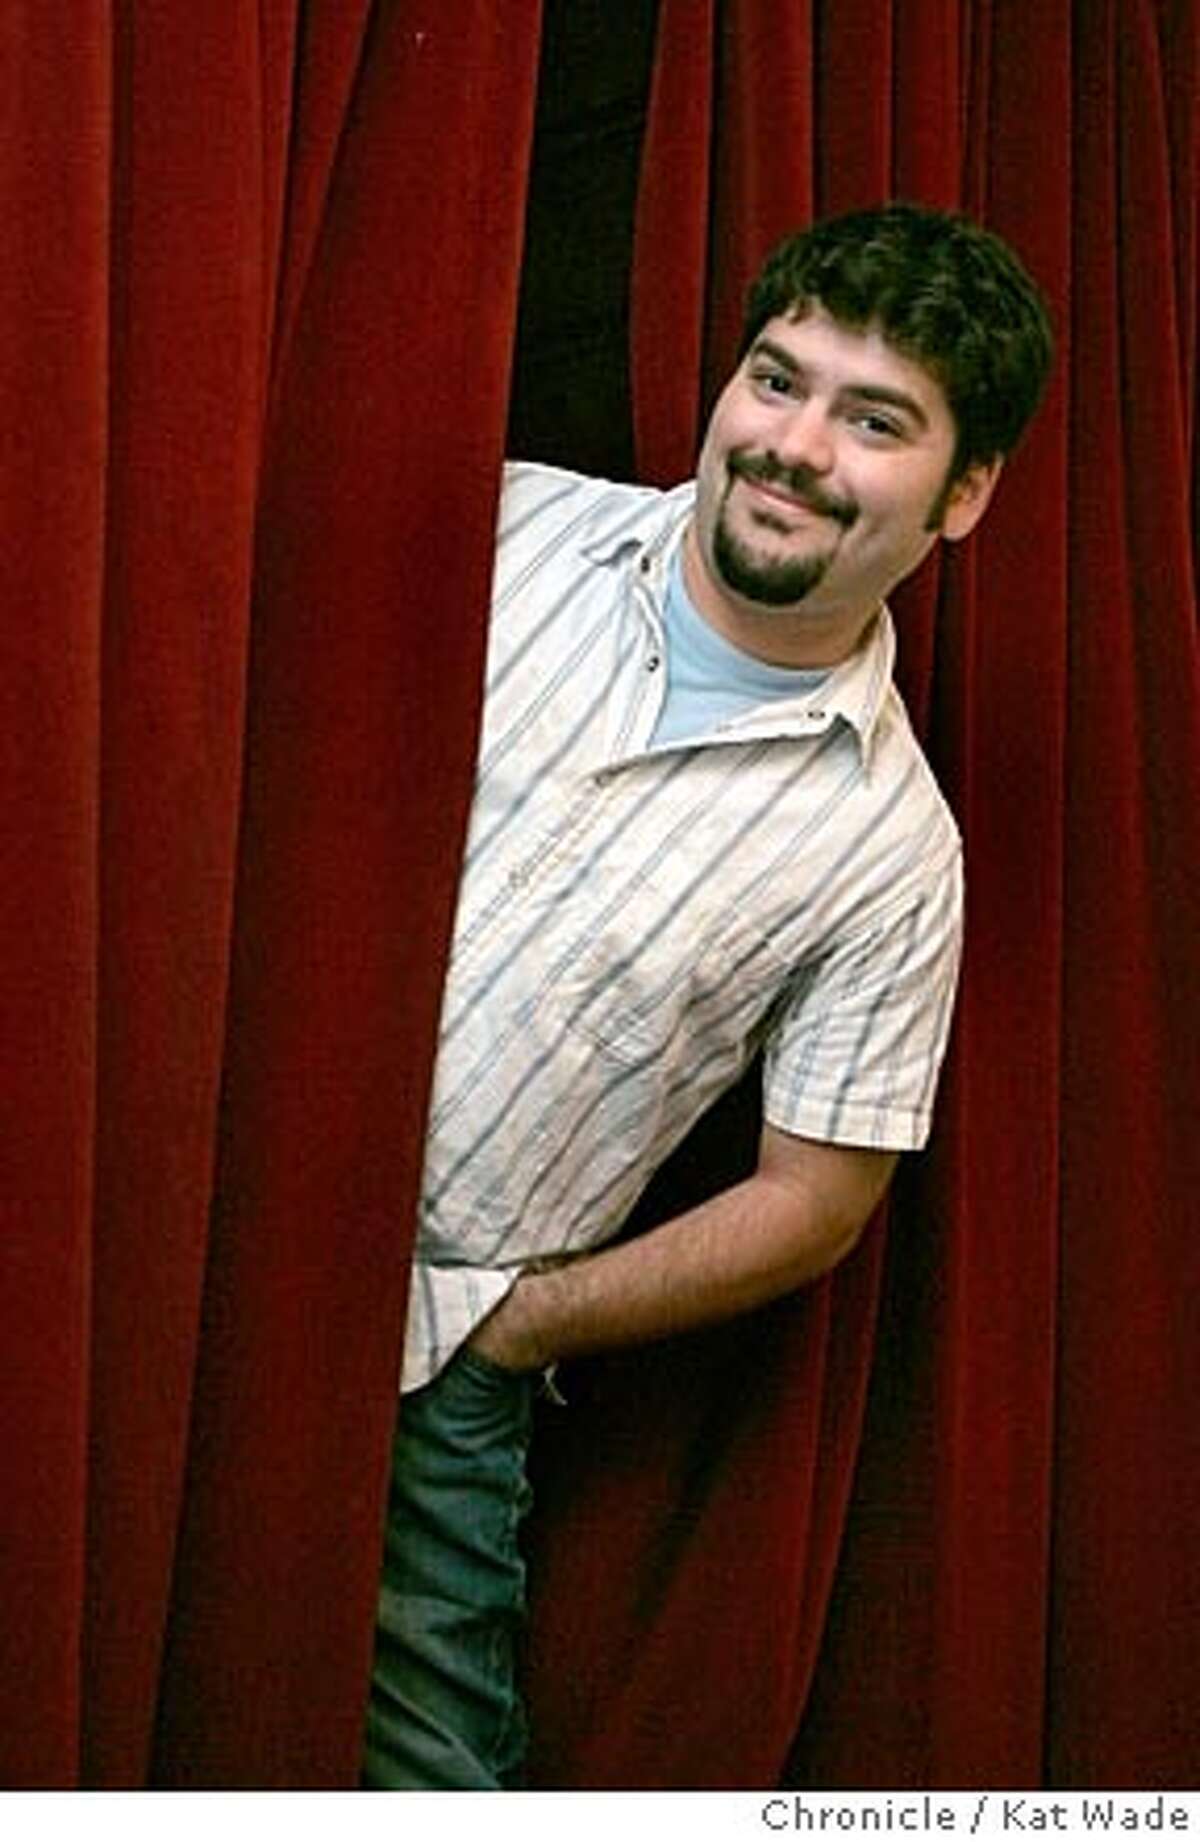 On 8/10/05 in Lafayette East Bay native Kevin Morales' whose new play, "Love Lafayette" opens on August 26th at the Town Hall Theatre poses for a portrait in thee Town Hall Theatre then in the hills of Lafayette. Kat Wade/ The Chronicle